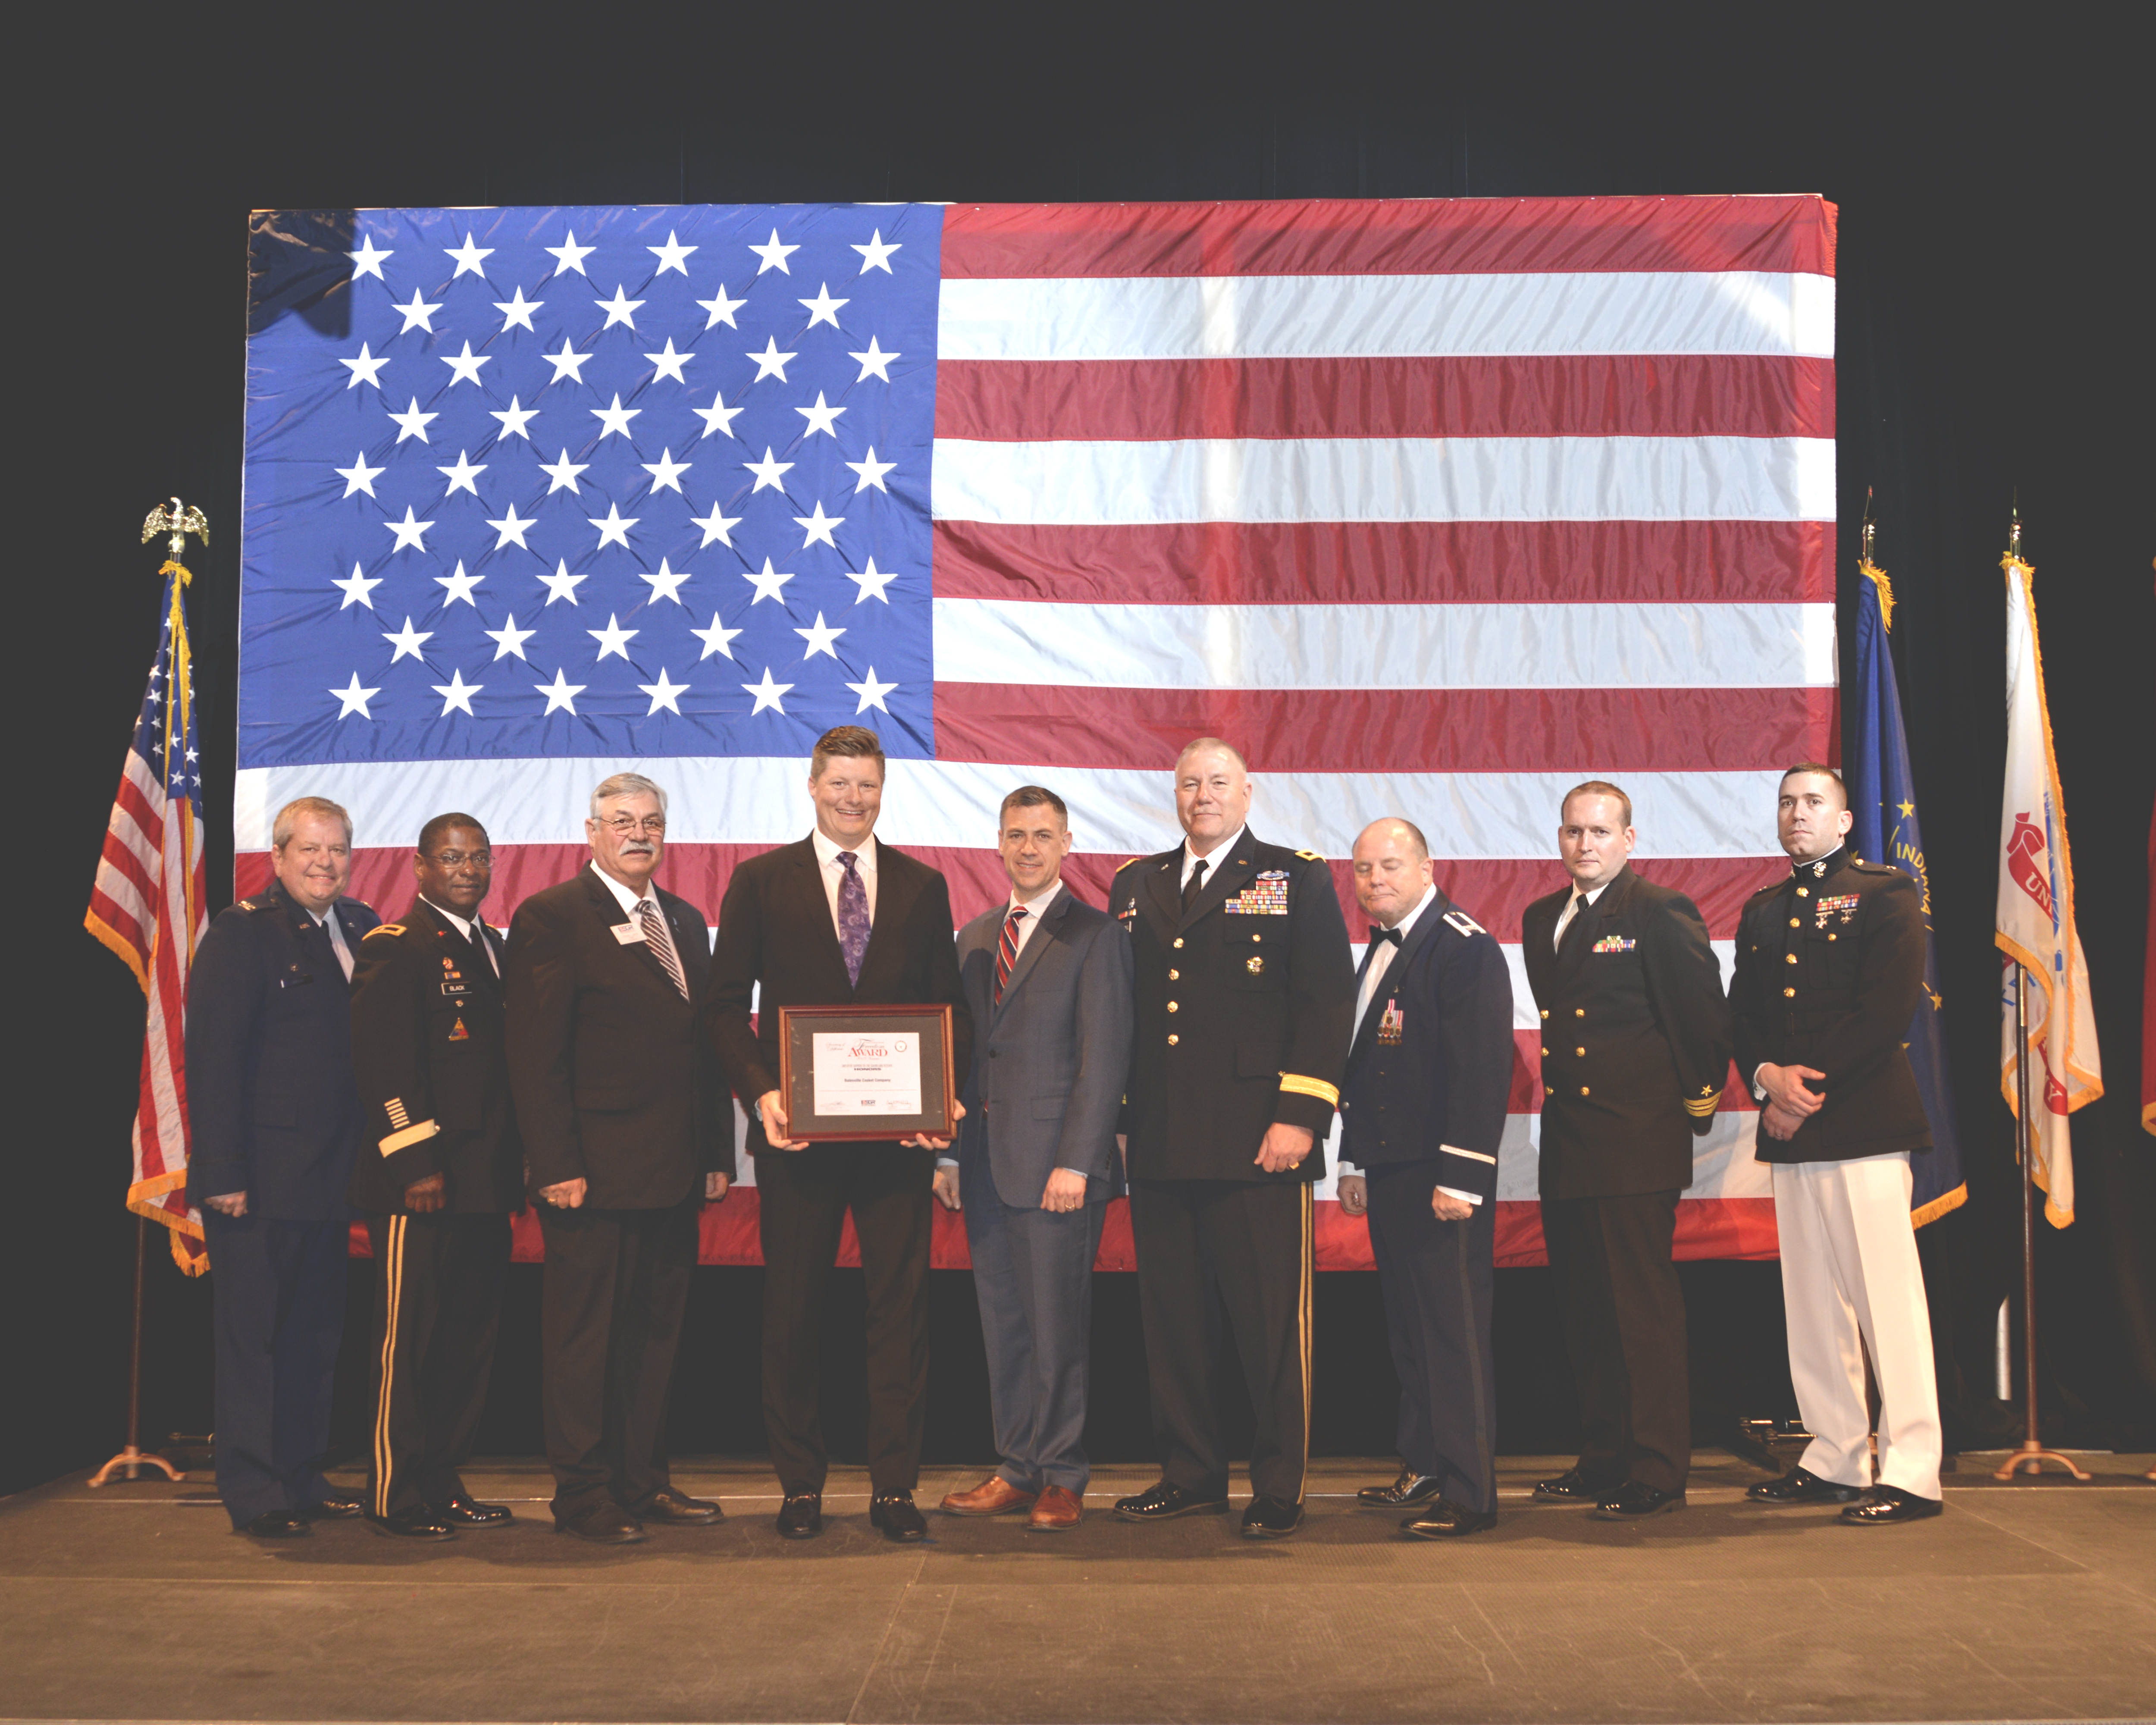 David Meyers is shown with Congressman Jim Banks (IN-03) and military leaders representing various branches of service at the Employer Awards Banquet in Indianapolis.